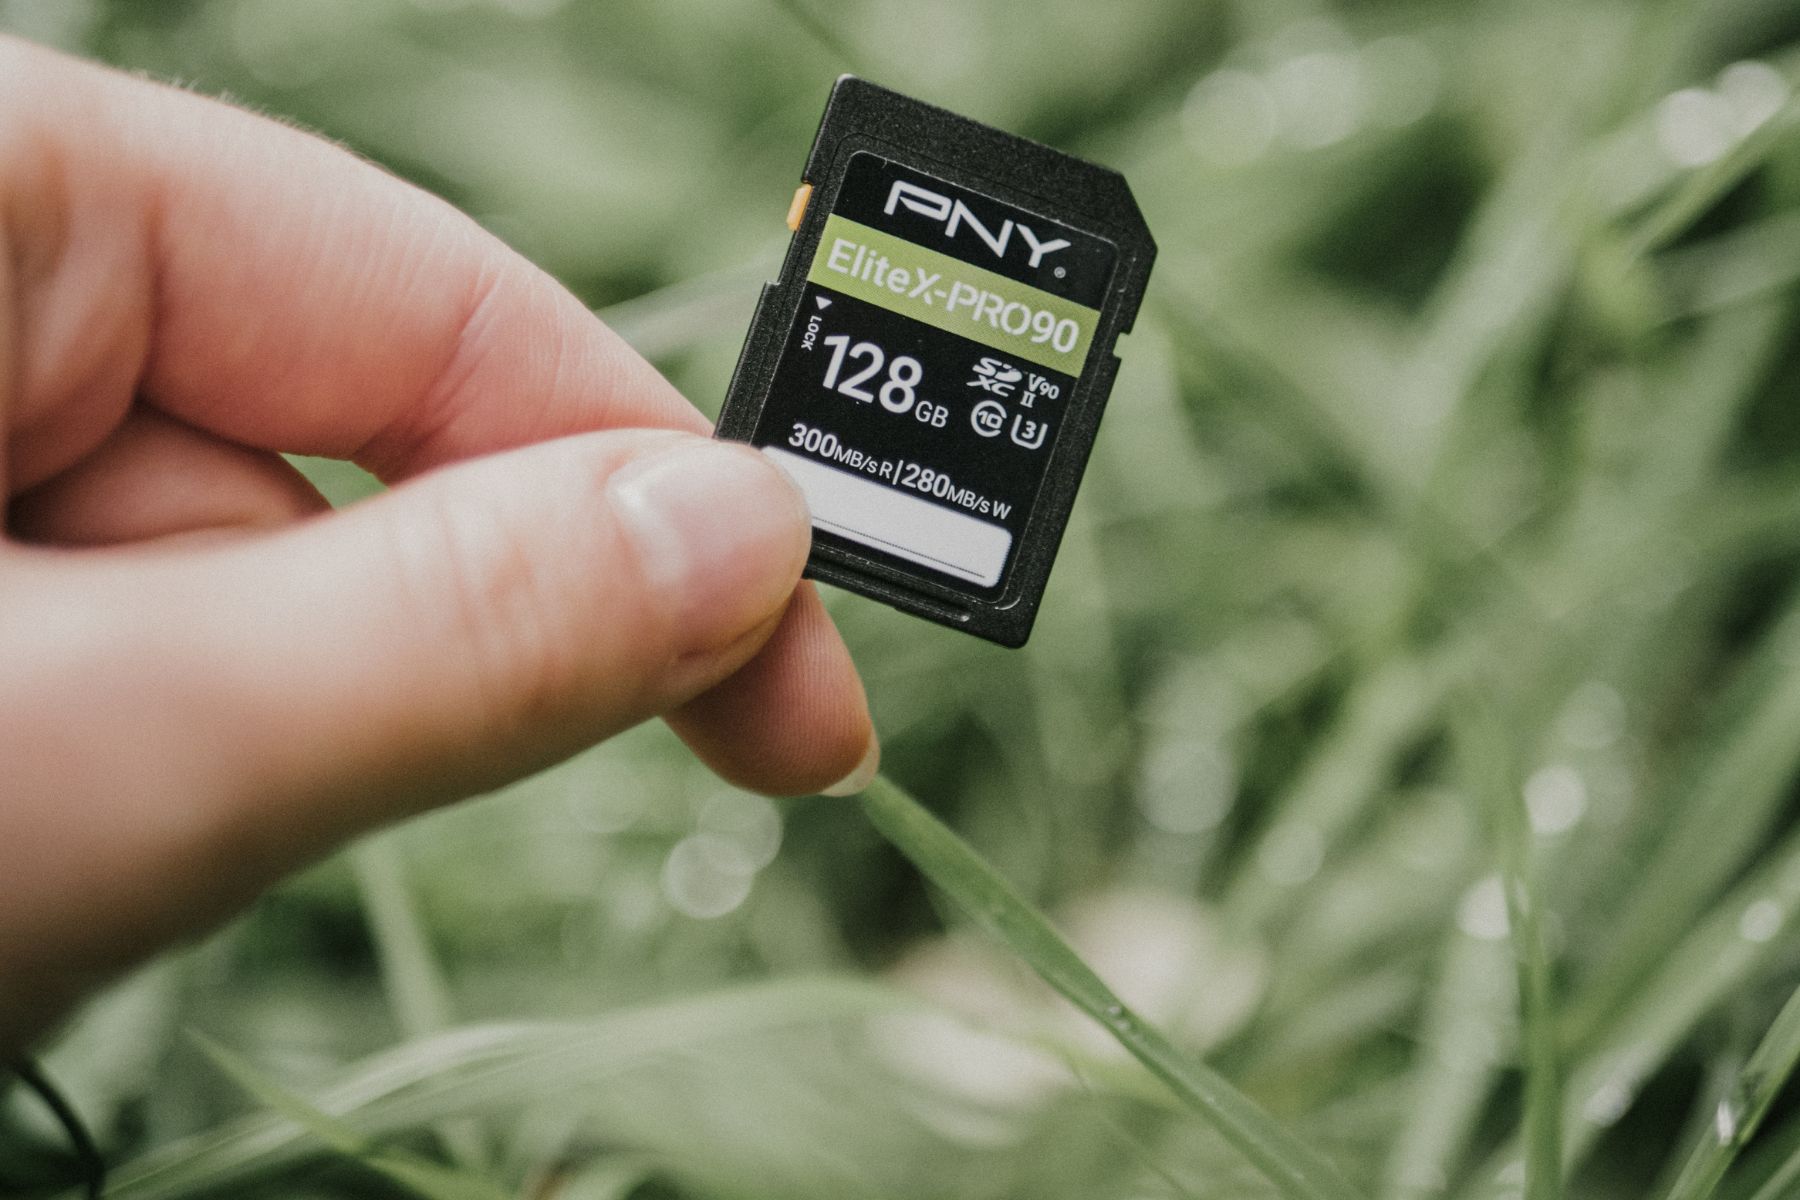 Shoot like a pro with PNY UHS-II SD Flash Memory Cards